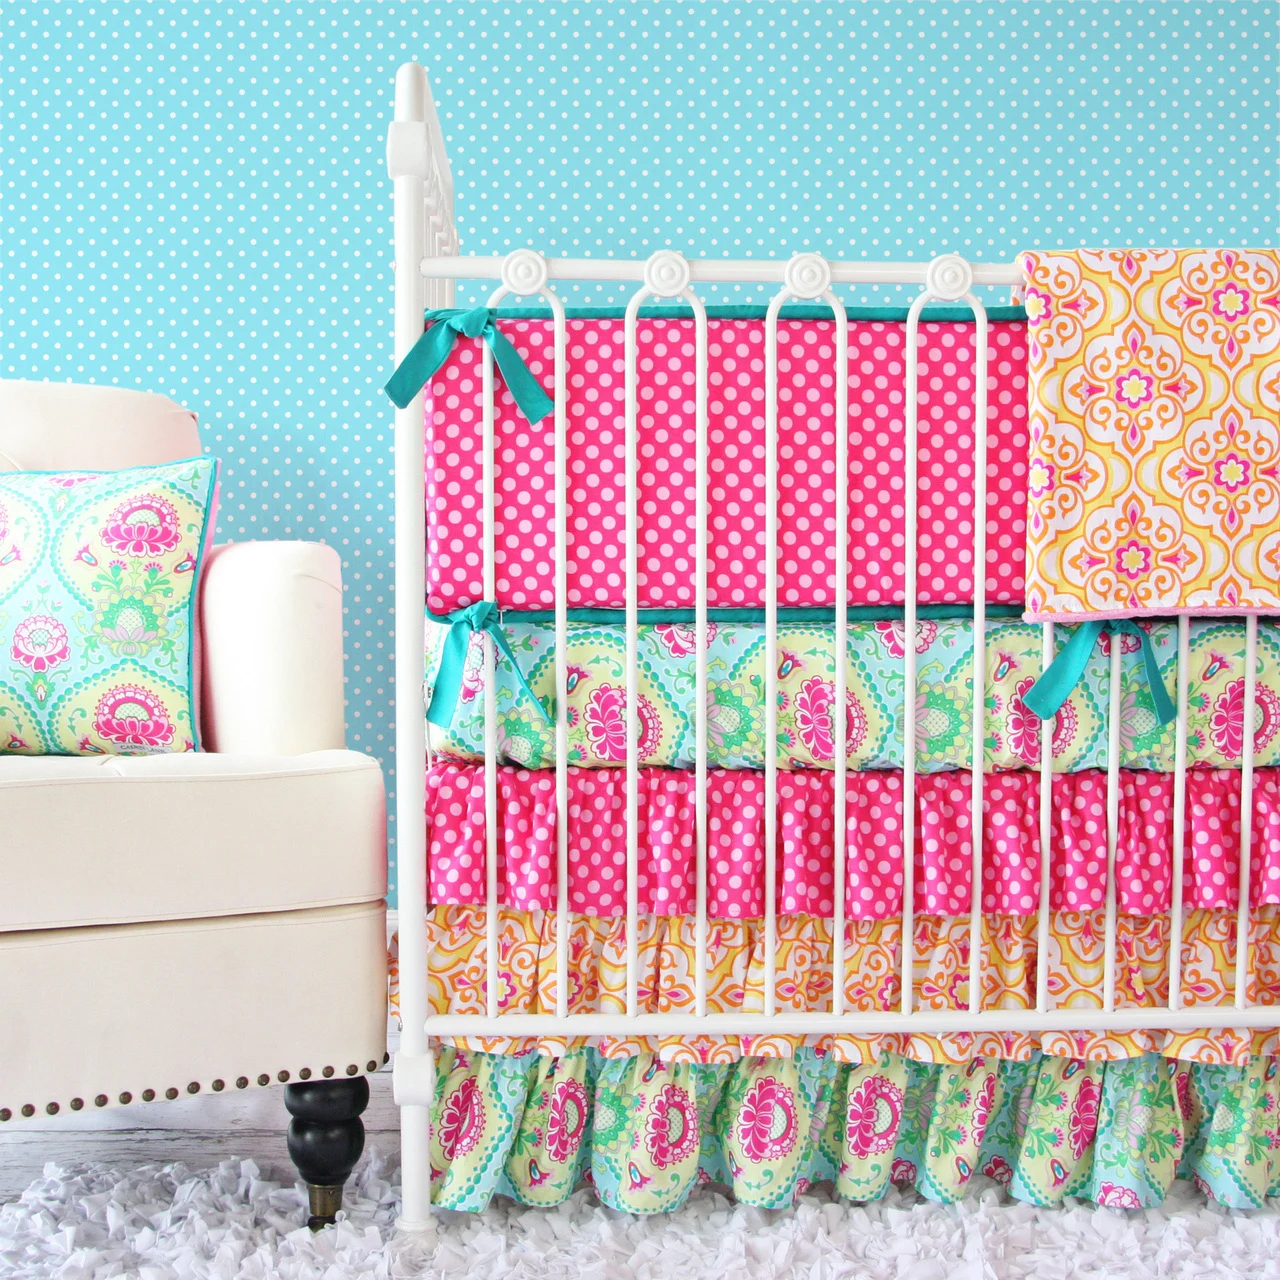 Pink and Turquoise Crib Bedding Set by Caden Lane